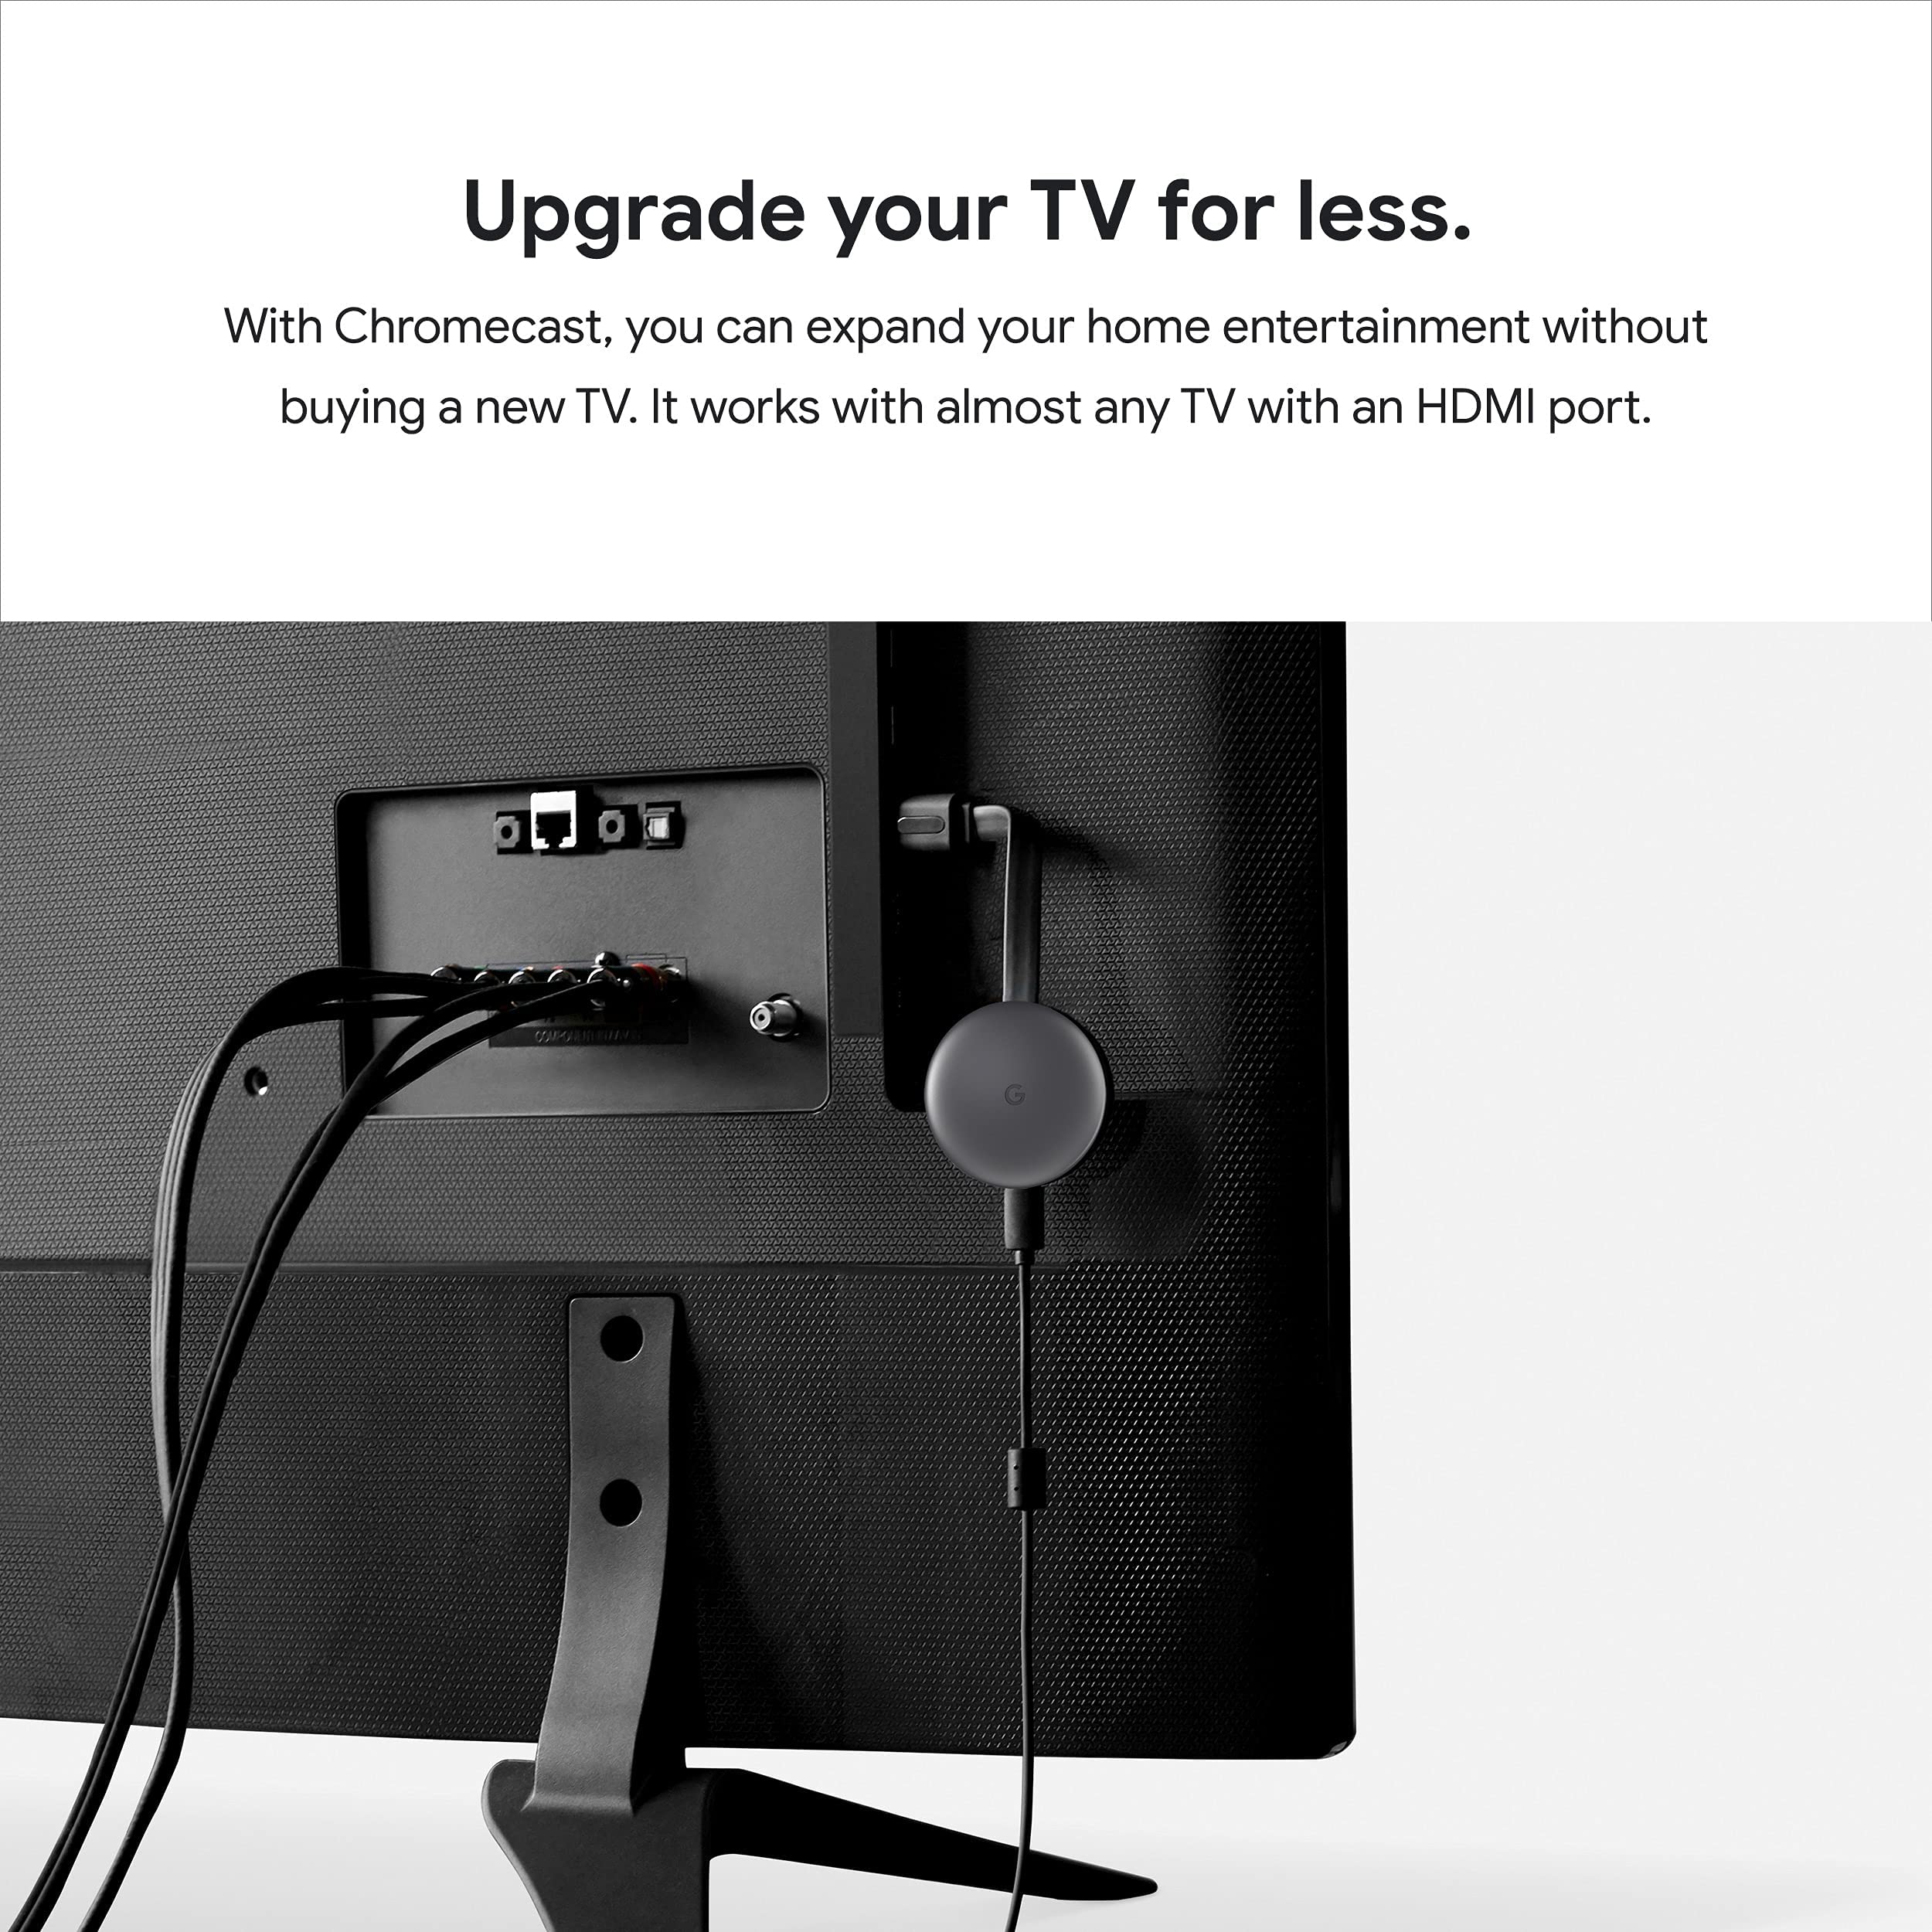 Chromecast device connected to a TV